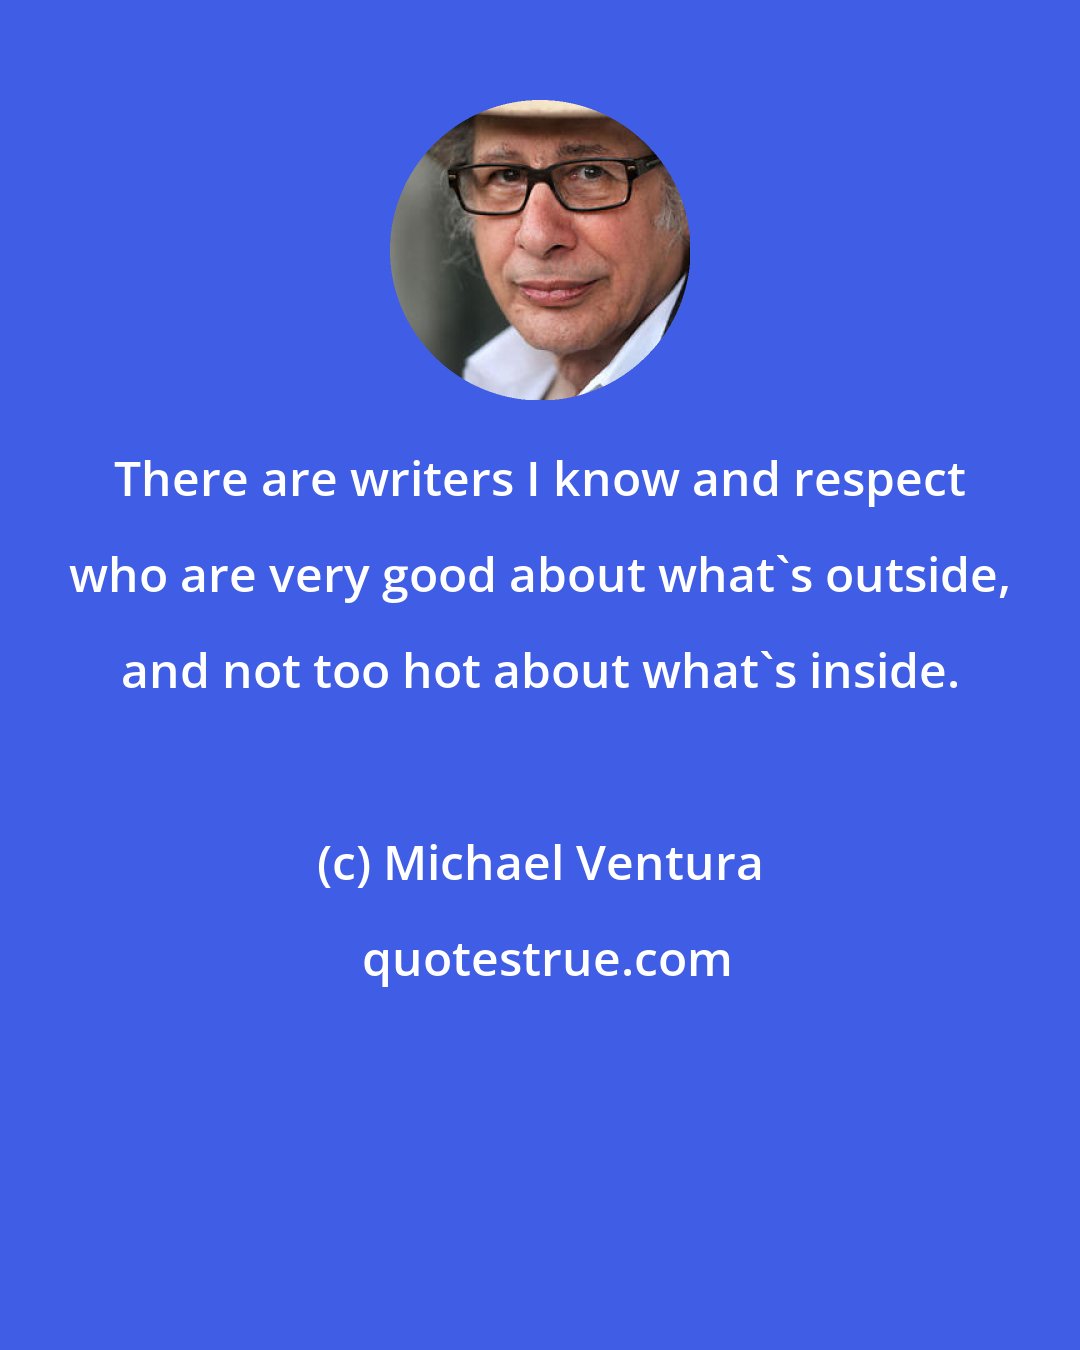 Michael Ventura: There are writers I know and respect who are very good about what's outside, and not too hot about what's inside.